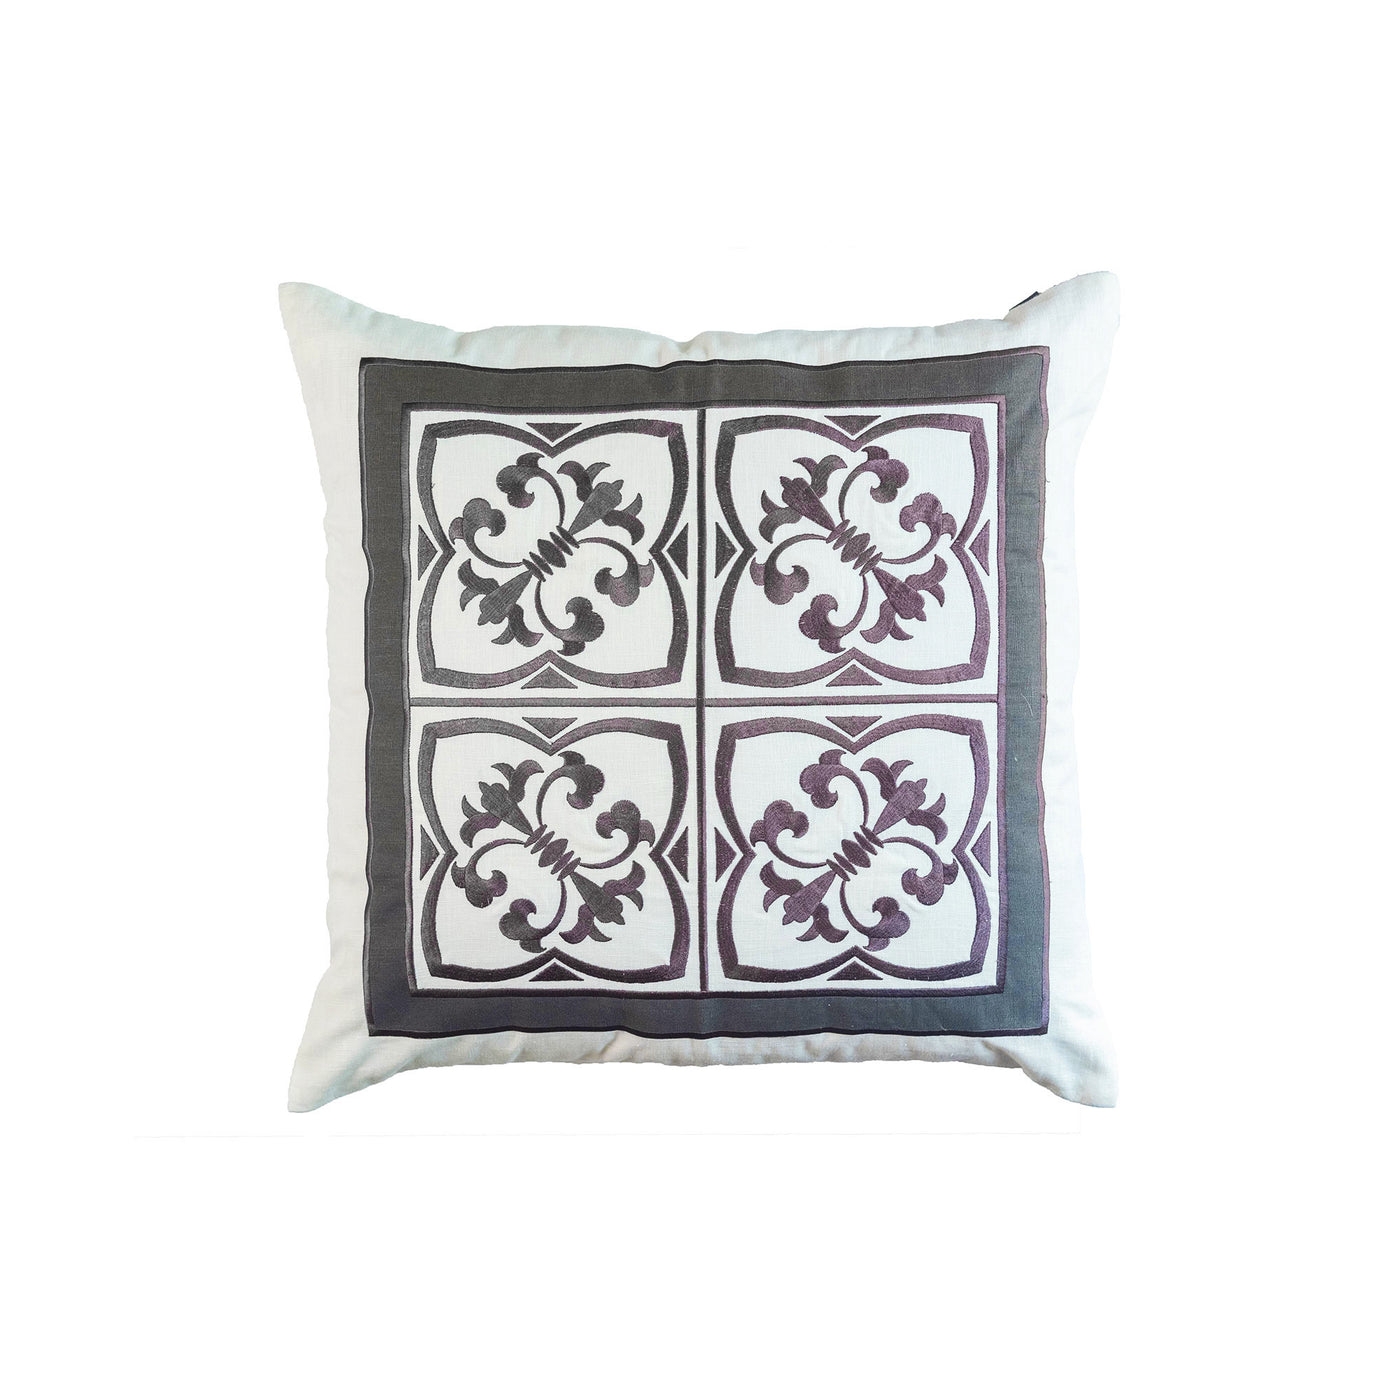 Lulu Square Pillow White Pewter 22x22 (FINAL SALE)